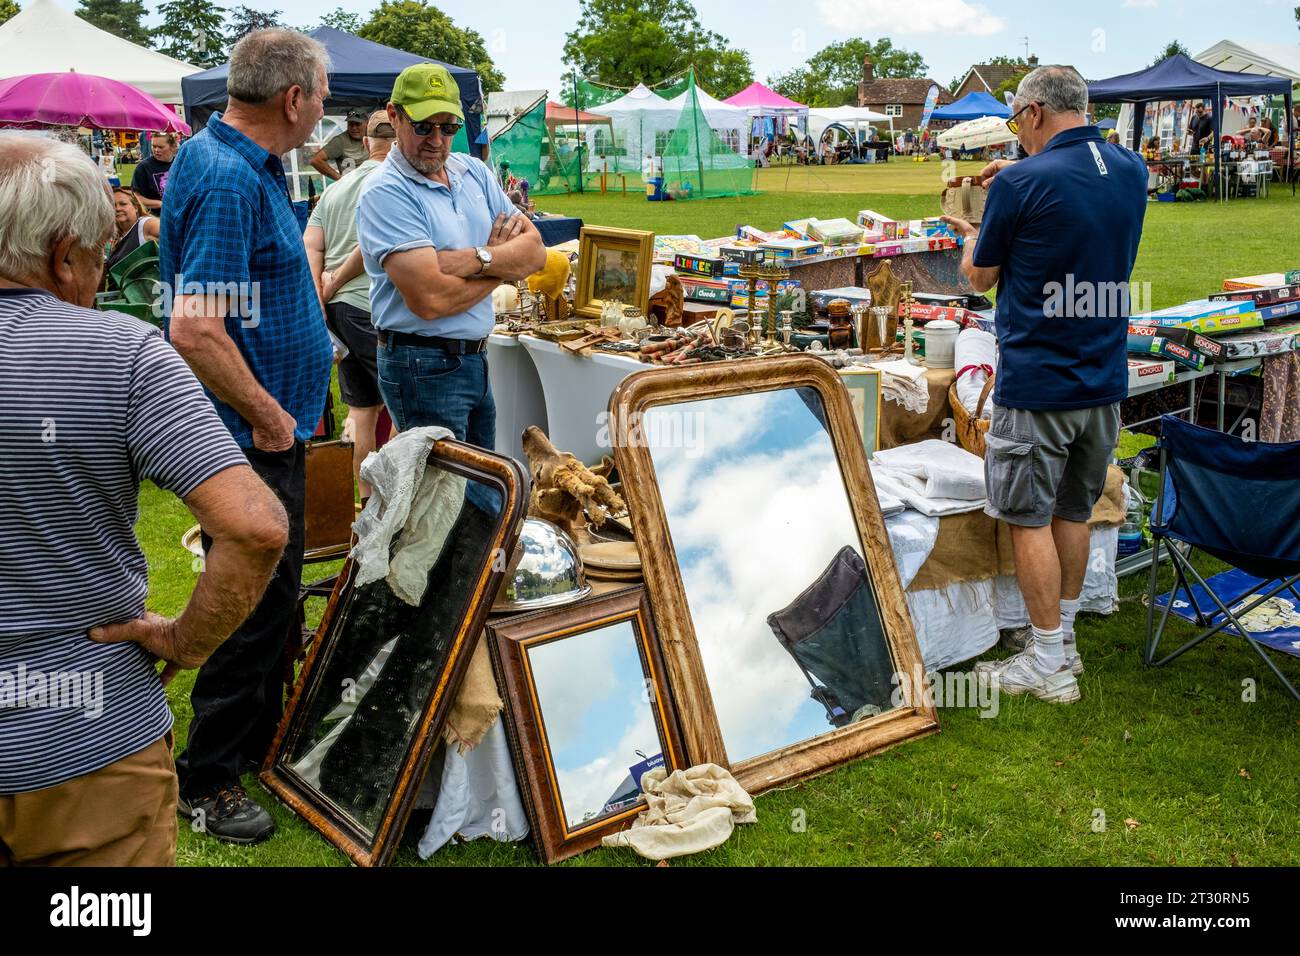 People Gather Around A Bric a Brac Stall At The Annual Nutley Village Fete, Nutley, East Sussex, UK. Stock Photo